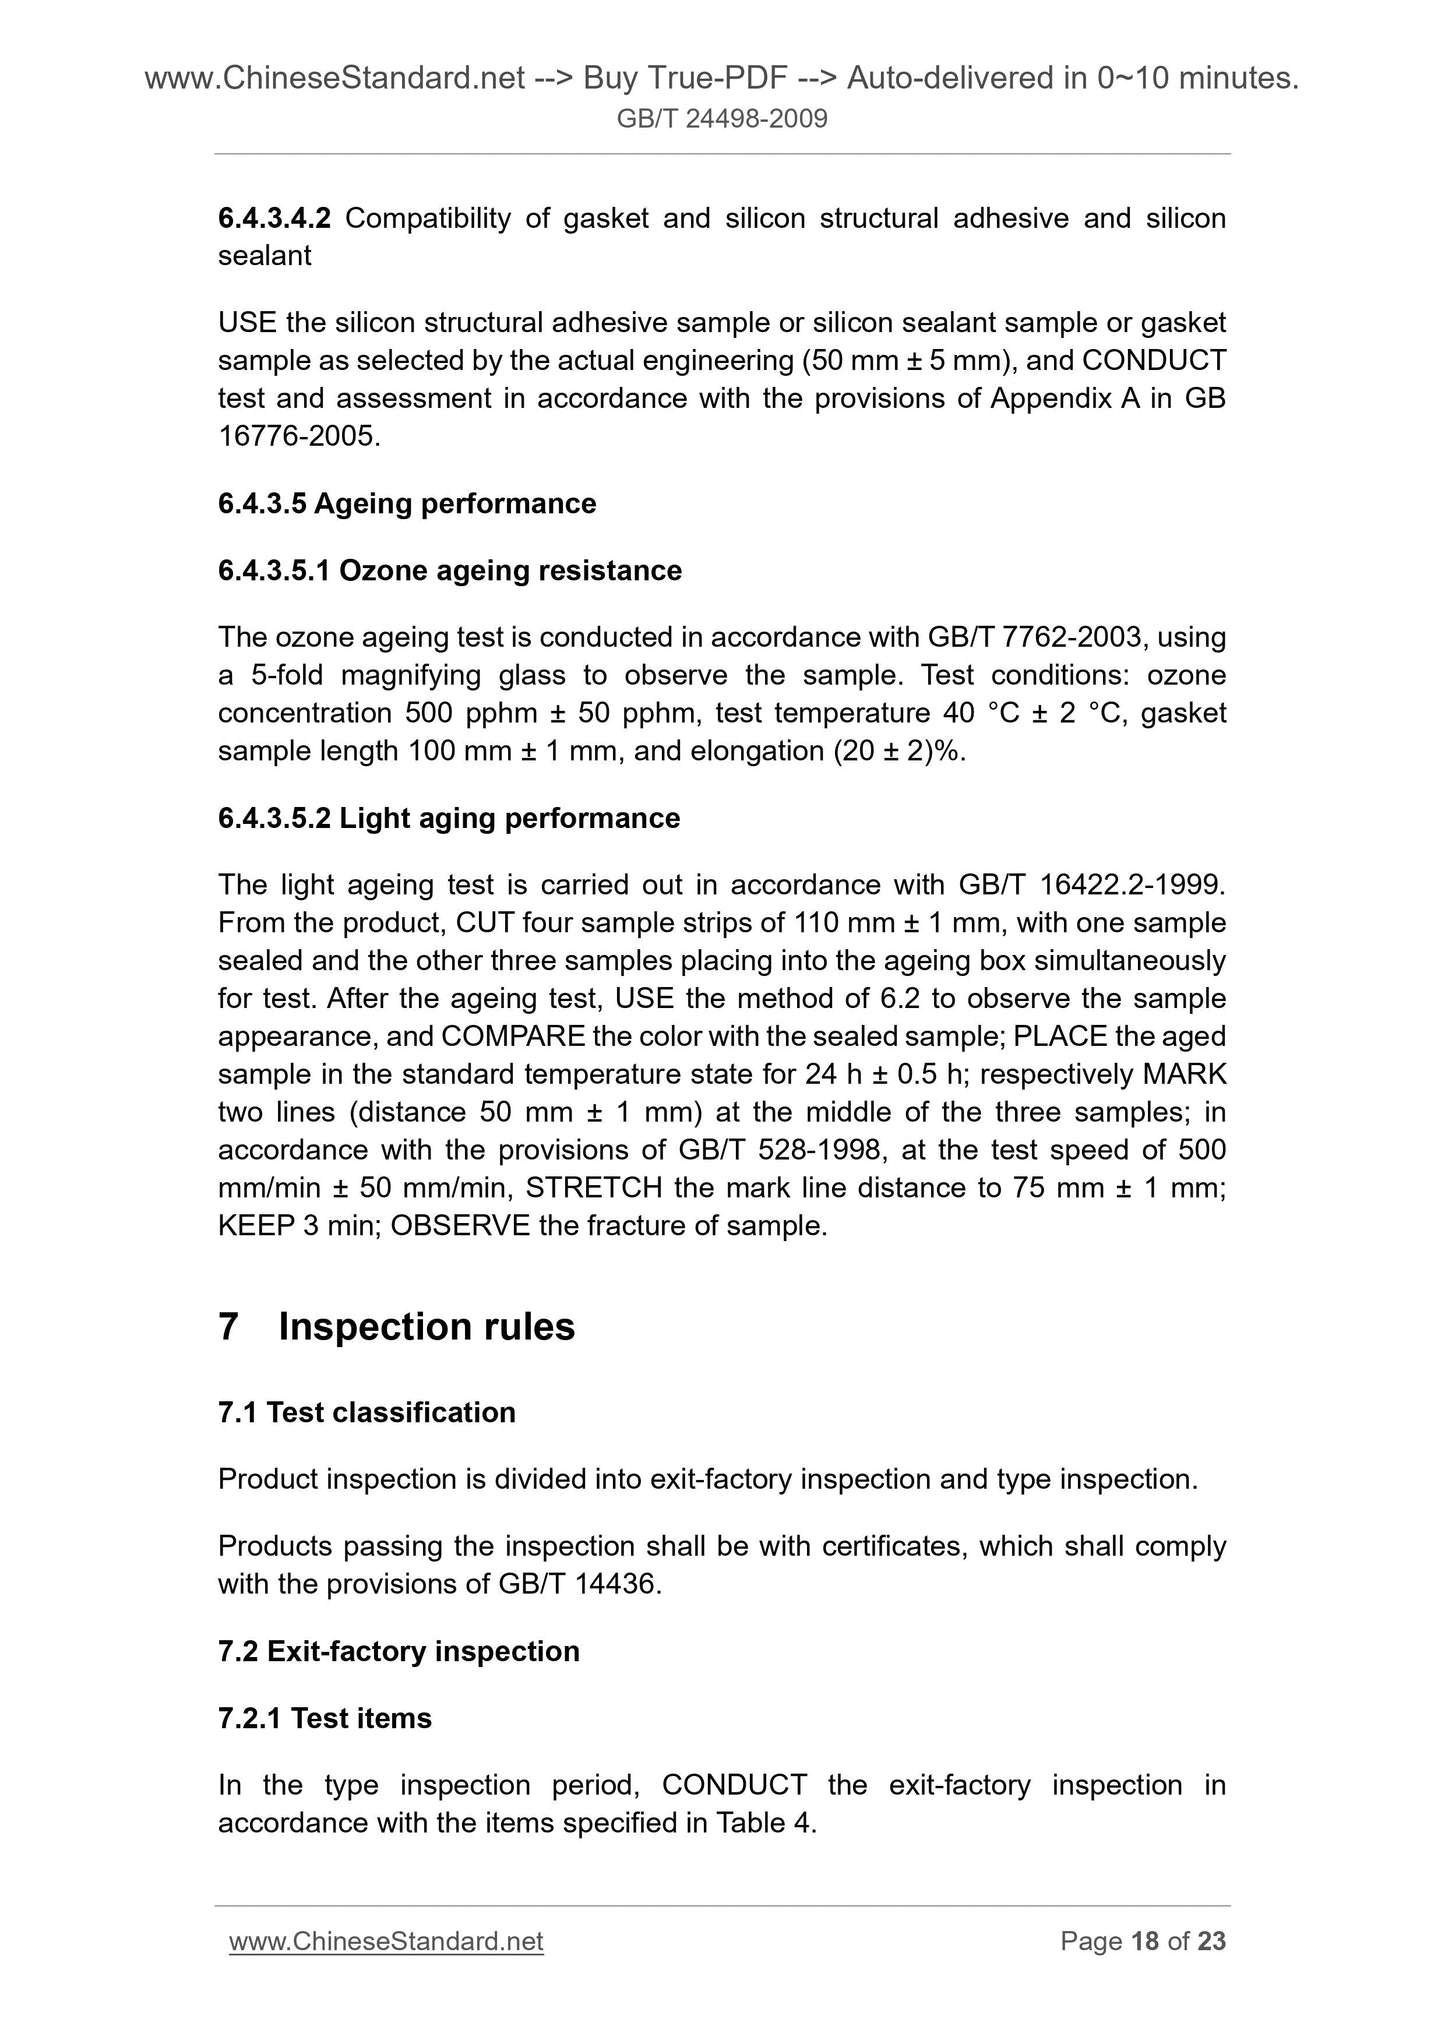 GB/T 24498-2009 Page 11